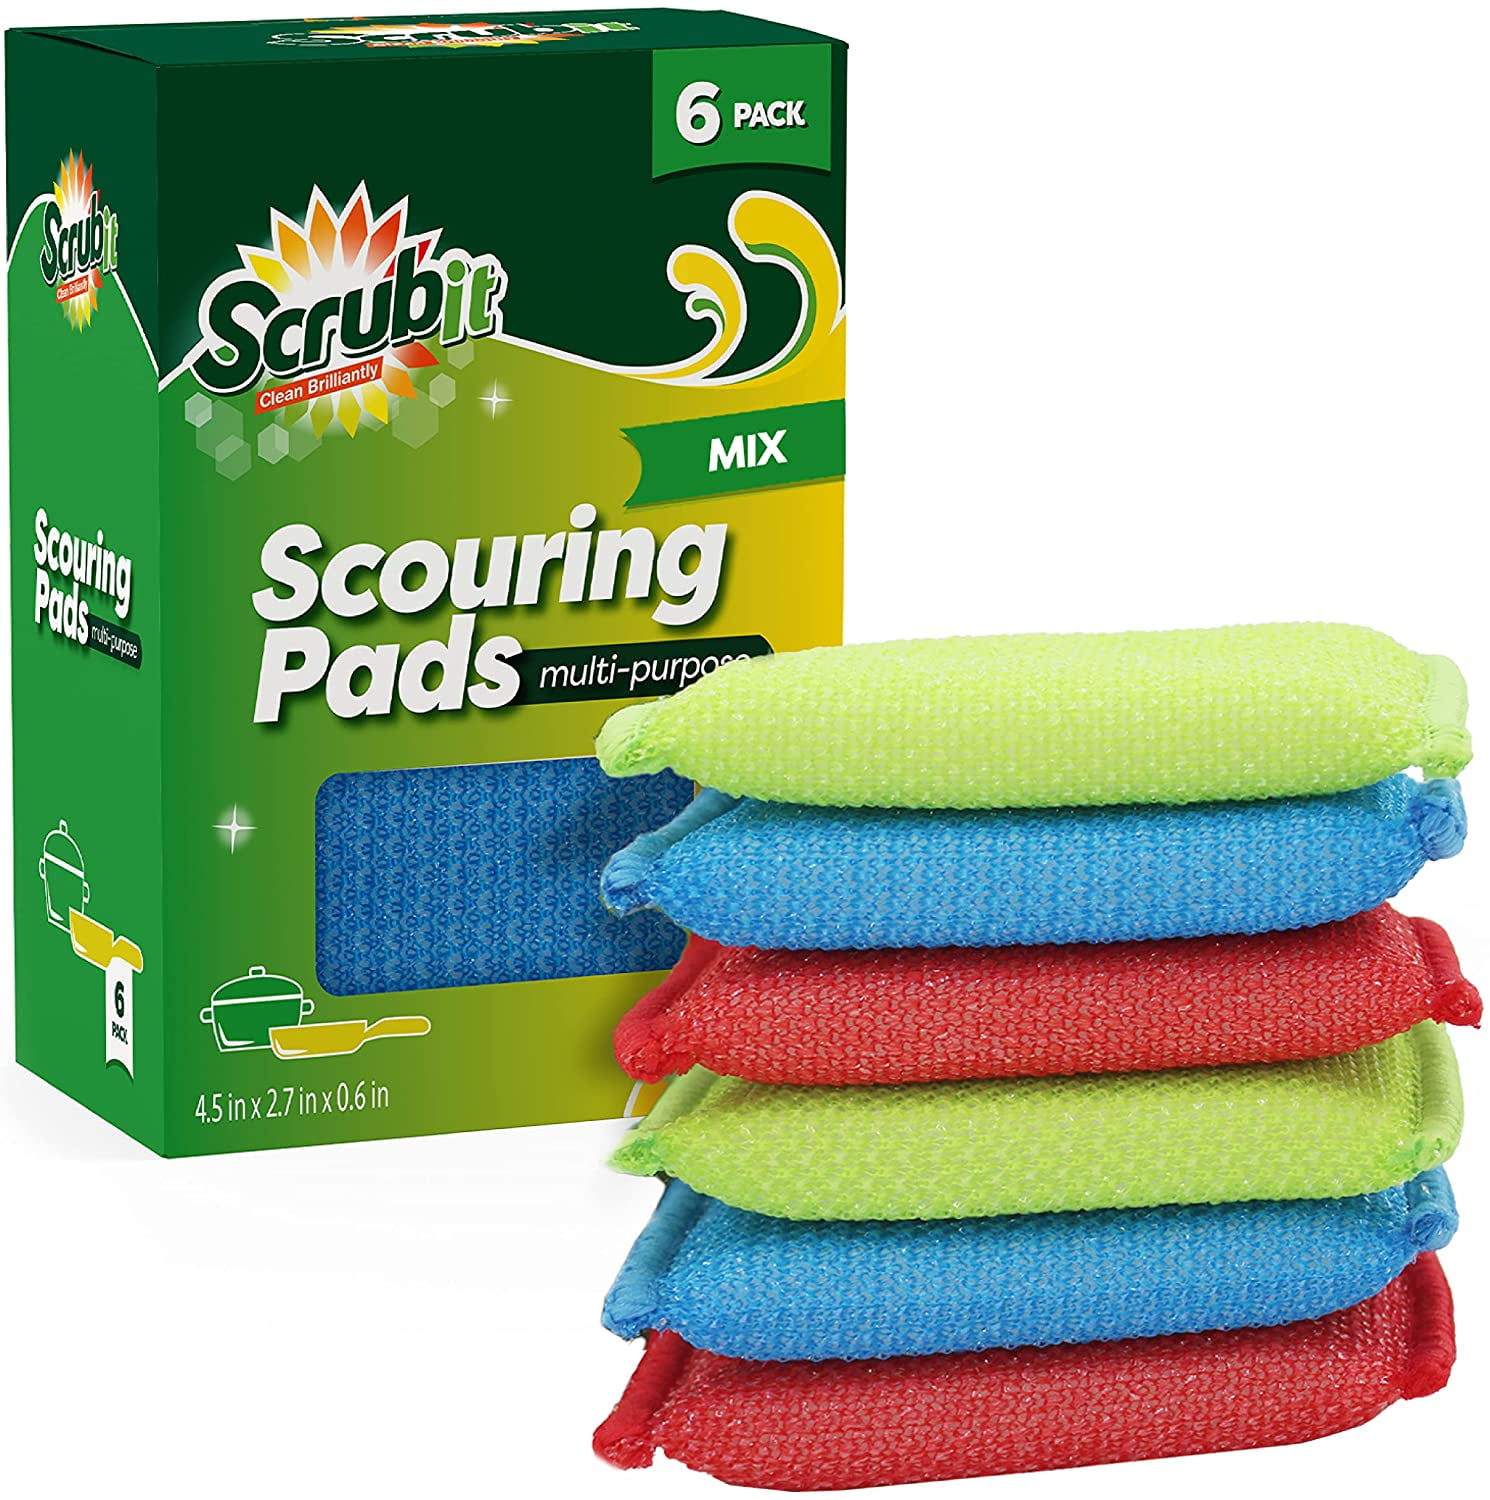 SCRUBIT Multi-Purpose Scouring Pad - Non-Scratch Cleaning Sponges for Pots,  Pans, Dishes, Utensils & Non-Stick Cookware - Scrubbing Pads Use for  Kitchen, Bathroom & More - 6 Pack (Orange) 